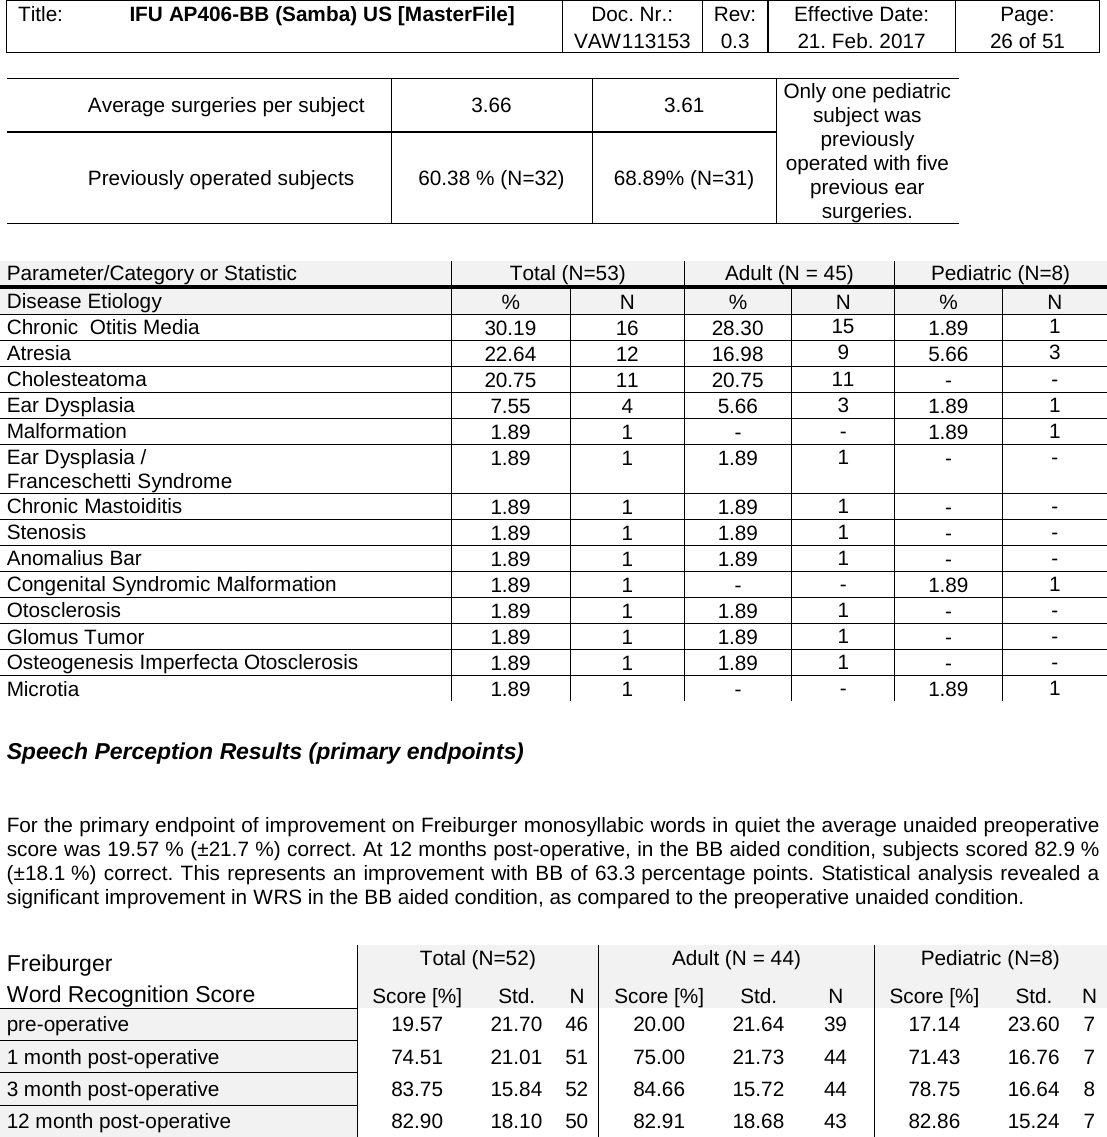 Title: IFU AP406-BB (Samba) US [MasterFile] Doc. Nr.: Rev: Effective Date: Page: VAW113153 0.3 21. Feb. 2017 26 of 51   Average surgeries per subject 3.66 3.61 Only one pediatric subject was previously operated with five previous ear surgeries.  Previously operated subjects 60.38 % (N=32) 68.89% (N=31)  Parameter/Category or Statistic Total (N=53) Adult (N = 45) Pediatric (N=8) Disease Etiology % N % N % N Chronic  Otitis Media 30.19 16 28.30 15 1.89 1 Atresia 22.64 12 16.98 9 5.66 3 Cholesteatoma 20.75 11 20.75 11 - - Ear Dysplasia 7.55 4 5.66 3 1.89 1 Malformation 1.89 1 - - 1.89 1 Ear Dysplasia / Franceschetti Syndrome 1.89 1 1.89 1 - - Chronic Mastoiditis 1.89 1 1.89 1 - - Stenosis 1.89 1 1.89 1 - - Anomalius Bar 1.89 1 1.89 1 - - Congenital Syndromic Malformation 1.89 1 - - 1.89 1 Otosclerosis 1.89 1 1.89 1 - - Glomus Tumor 1.89 1 1.89 1 - - Osteogenesis Imperfecta Otosclerosis 1.89 1 1.89 1 - - Microtia 1.89 1 - - 1.89 1  Speech Perception Results (primary endpoints)  For the primary endpoint of improvement on Freiburger monosyllabic words in quiet the average unaided preoperative score was 19.57 % (±21.7 %) correct. At 12 months post-operative, in the BB aided condition, subjects scored 82.9 % (±18.1 %) correct. This represents an improvement with BB of 63.3 percentage points. Statistical analysis revealed a significant improvement in WRS in the BB aided condition, as compared to the preoperative unaided condition.  Freiburger  Total (N=52) Adult (N = 44) Pediatric (N=8) Word Recognition Score  Score [%] Std. N Score [%] Std. N Score [%] Std. N pre-operative 19.57 21.70 46 20.00 21.64 39 17.14 23.60 7 1 month post-operative 74.51 21.01 51 75.00 21.73 44 71.43 16.76  7 3 month post-operative 83.75 15.84 52 84.66 15.72 44 78.75 16.64 8 12 month post-operative 82.90 18.10 50 82.91 18.68 43 82.86 15.24  7 